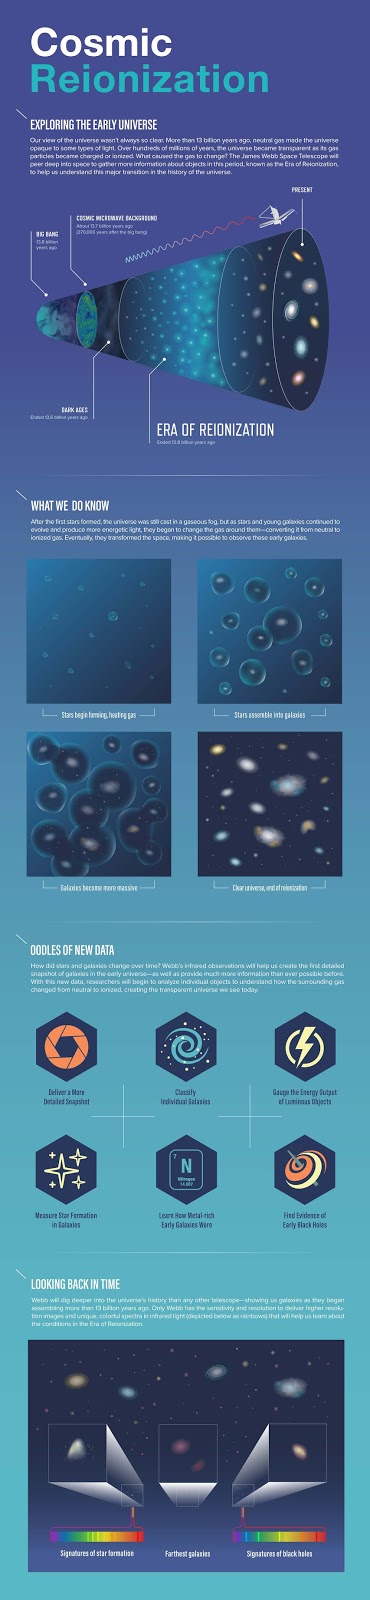 Mapping the early universe with NASA's Webb Telescope